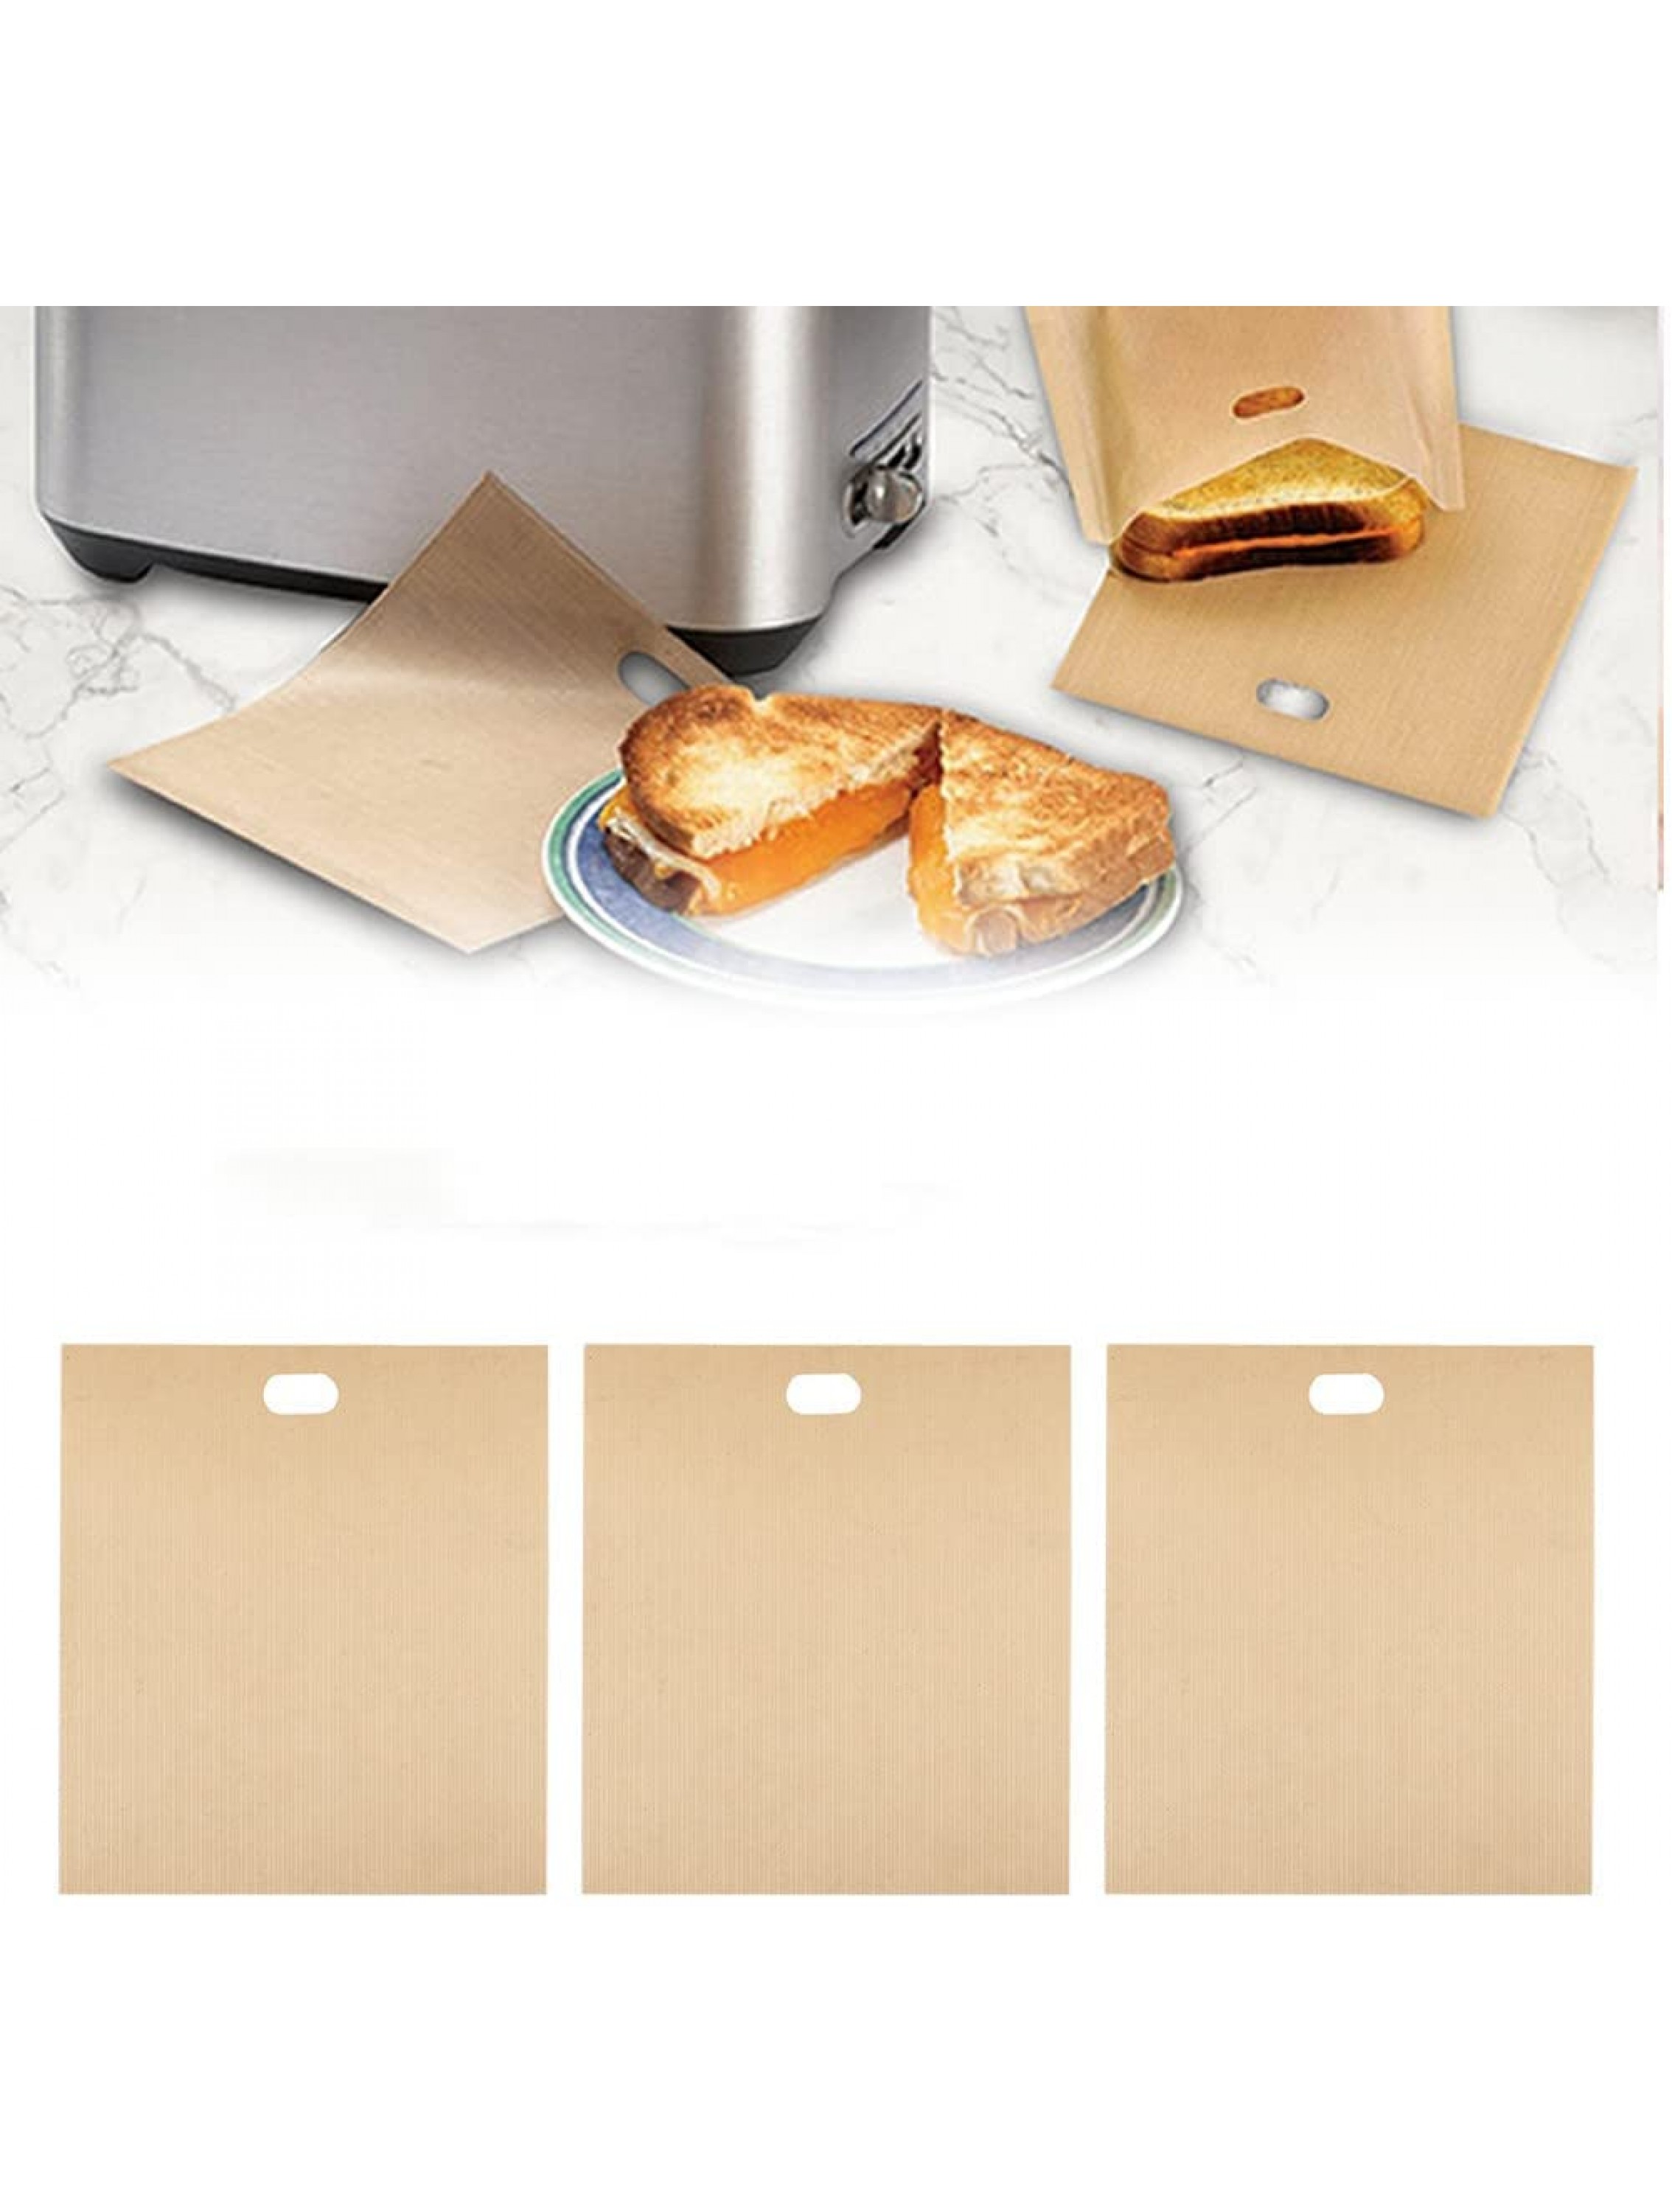 GEZICHTA 5pcs 16x16.5 cm Toaster Bags Reusable for Grilled Cheese Sandwiches Pizza Slices Chicken Vegetables Non-Stick Heat Resistance Easy to CleanBeige free size - B5EWSN7N5